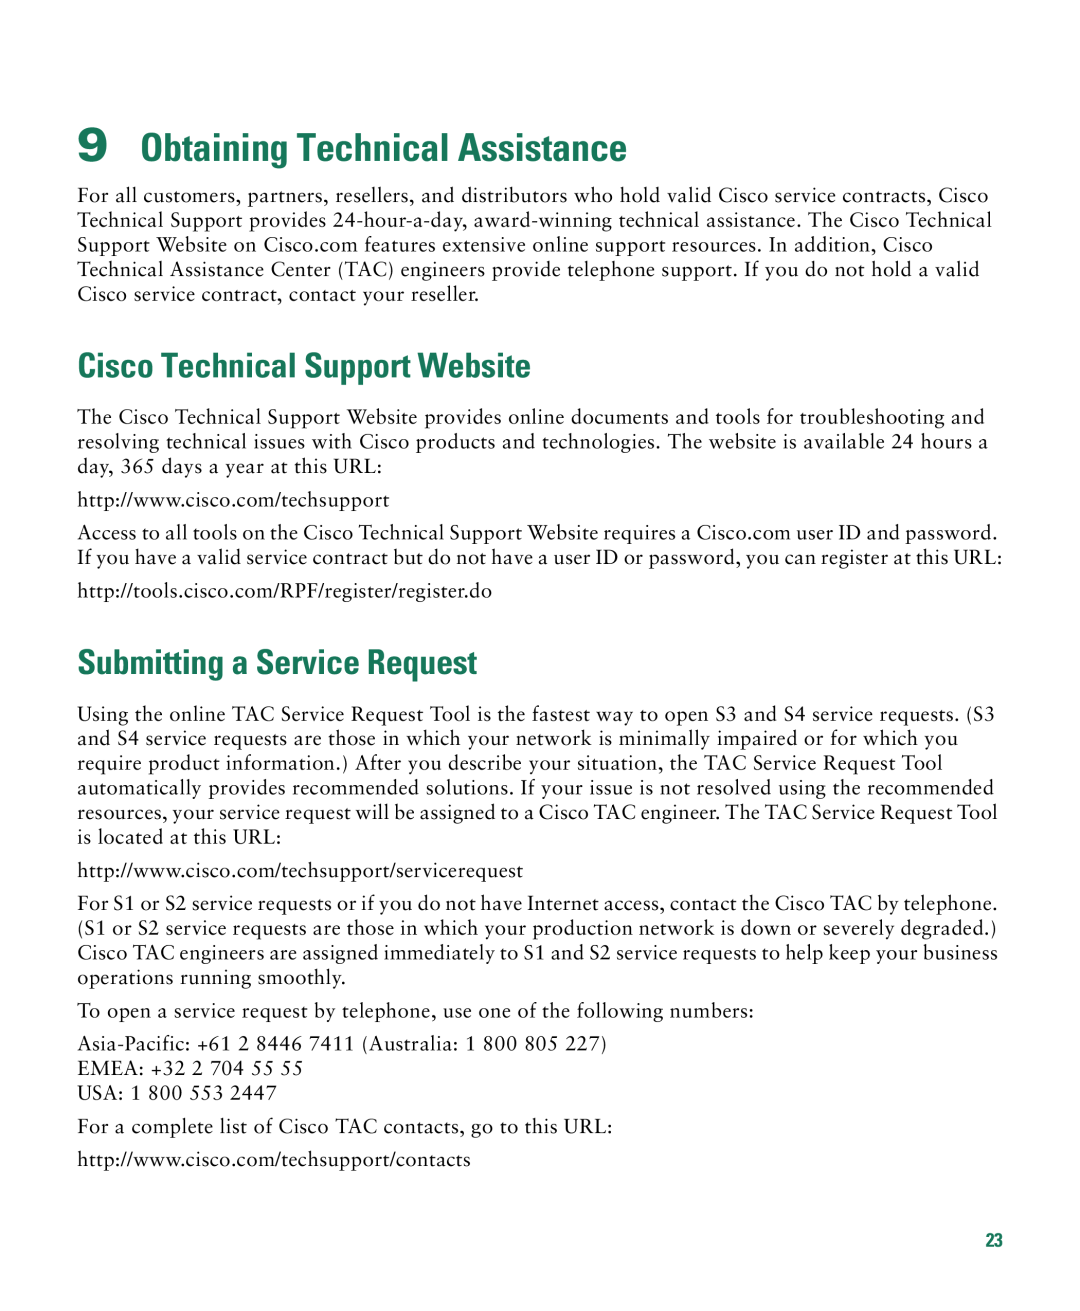 Cisco Systems CATALYST 2950 Obtaining Technical Assistance, Cisco Technical Support Website, Submitting a Service Request 